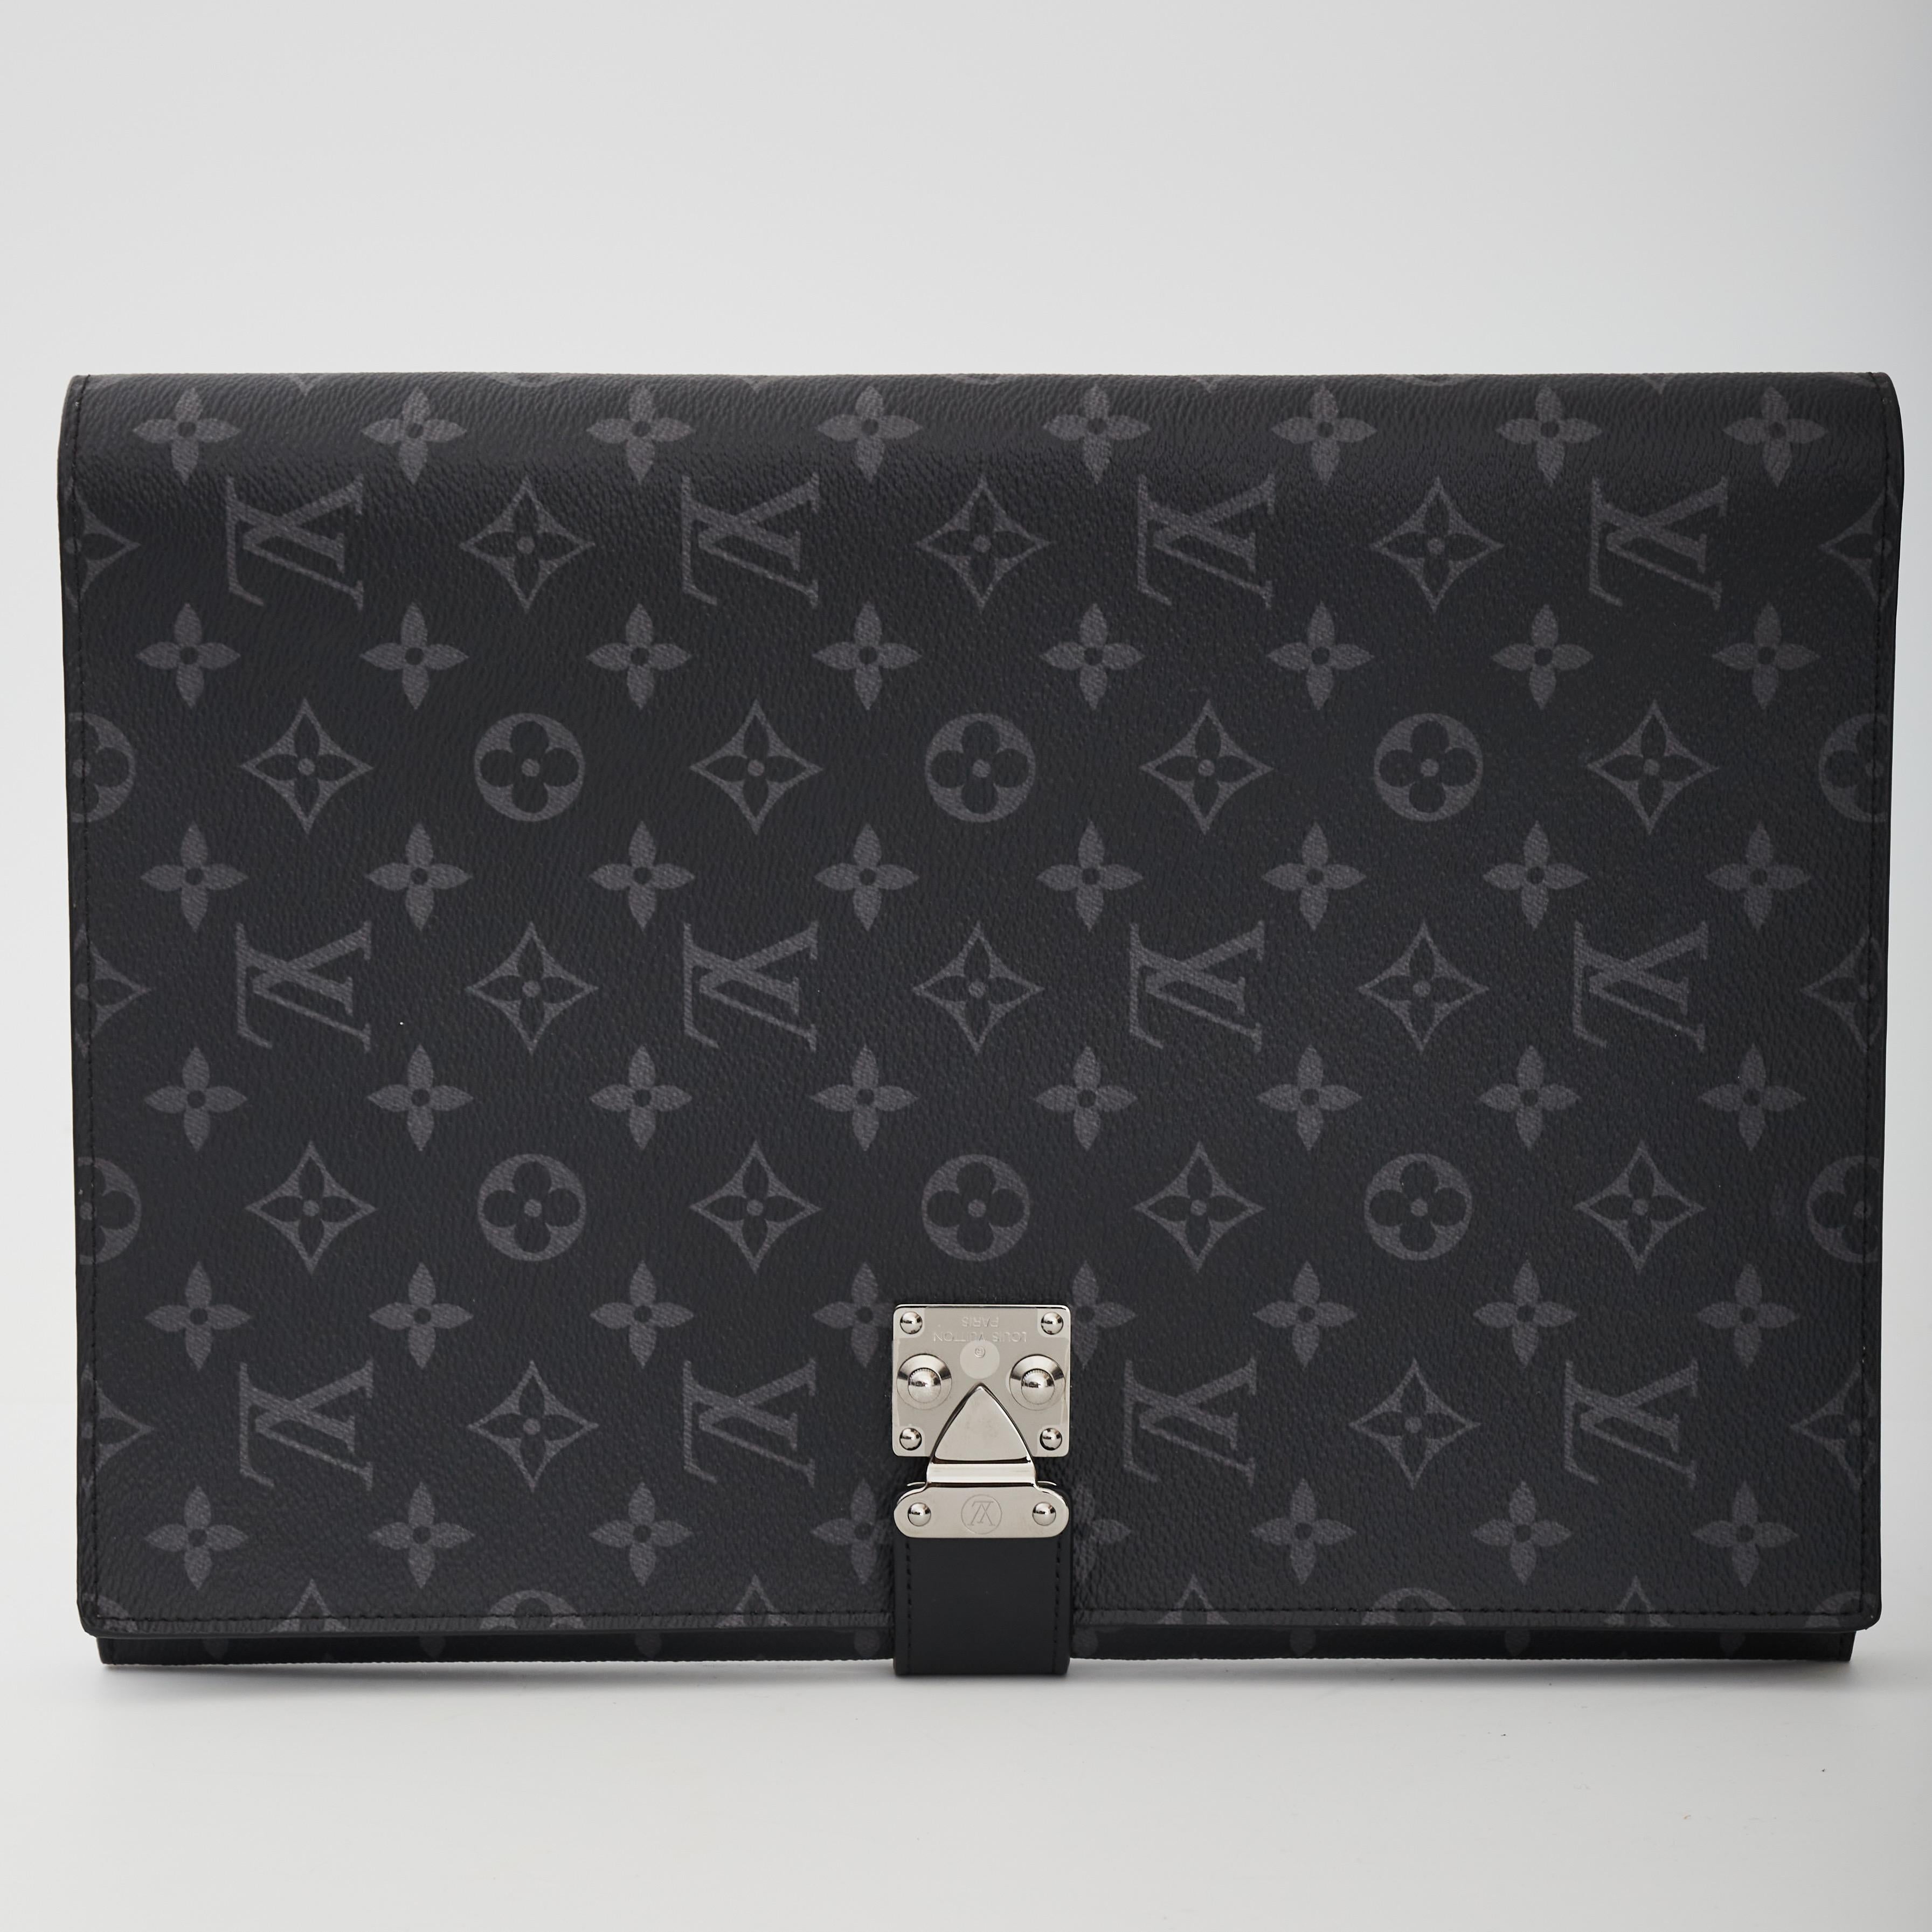 Louis vuitton portfolio. From the 2018 collection. Black coated canvas. Damier graphite pattern Silver-tone hardware. Leather lining & single interior pocket. Push-lock closure at front.

COLOR: Black
MATERIAL: Coated canvas with leather
DATE CODE: